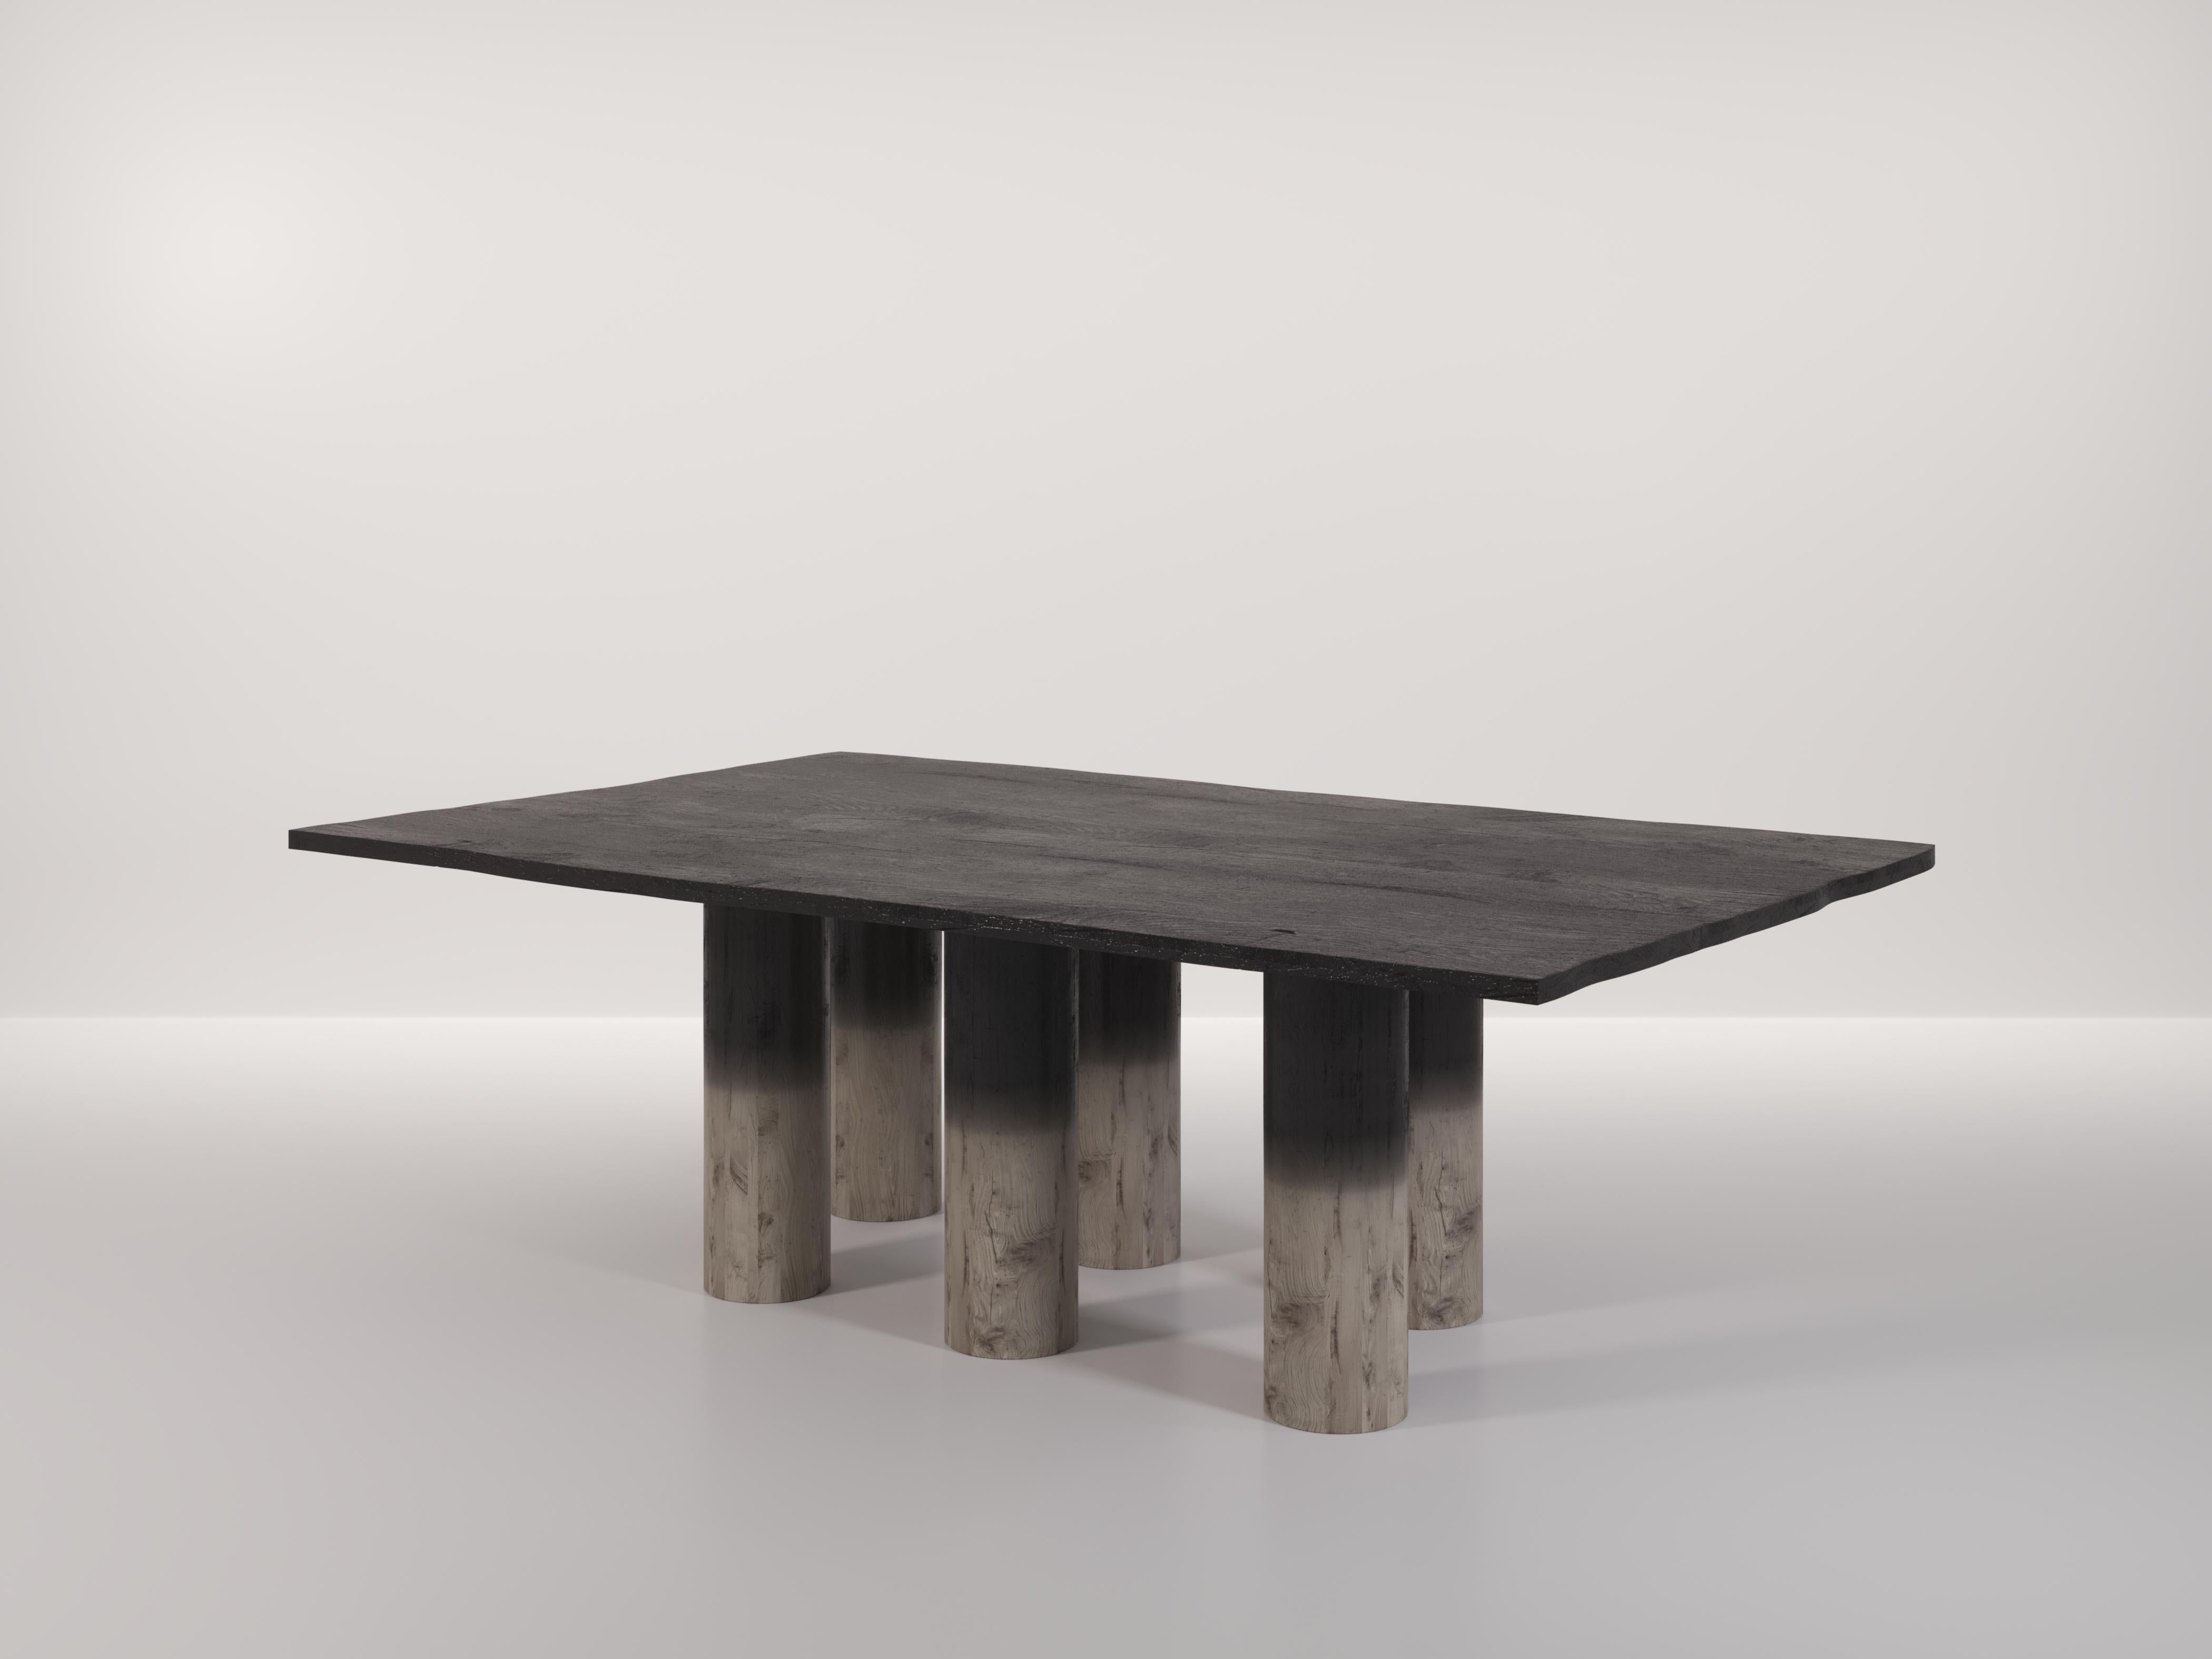 The Roots Table was designed to showcase the effect of burning the wood. When treating the wood, Studio Effe gradually ended the burning process as they got closer to the bottom. Giving the piece a gradient of dark to pale wood. The top piece of